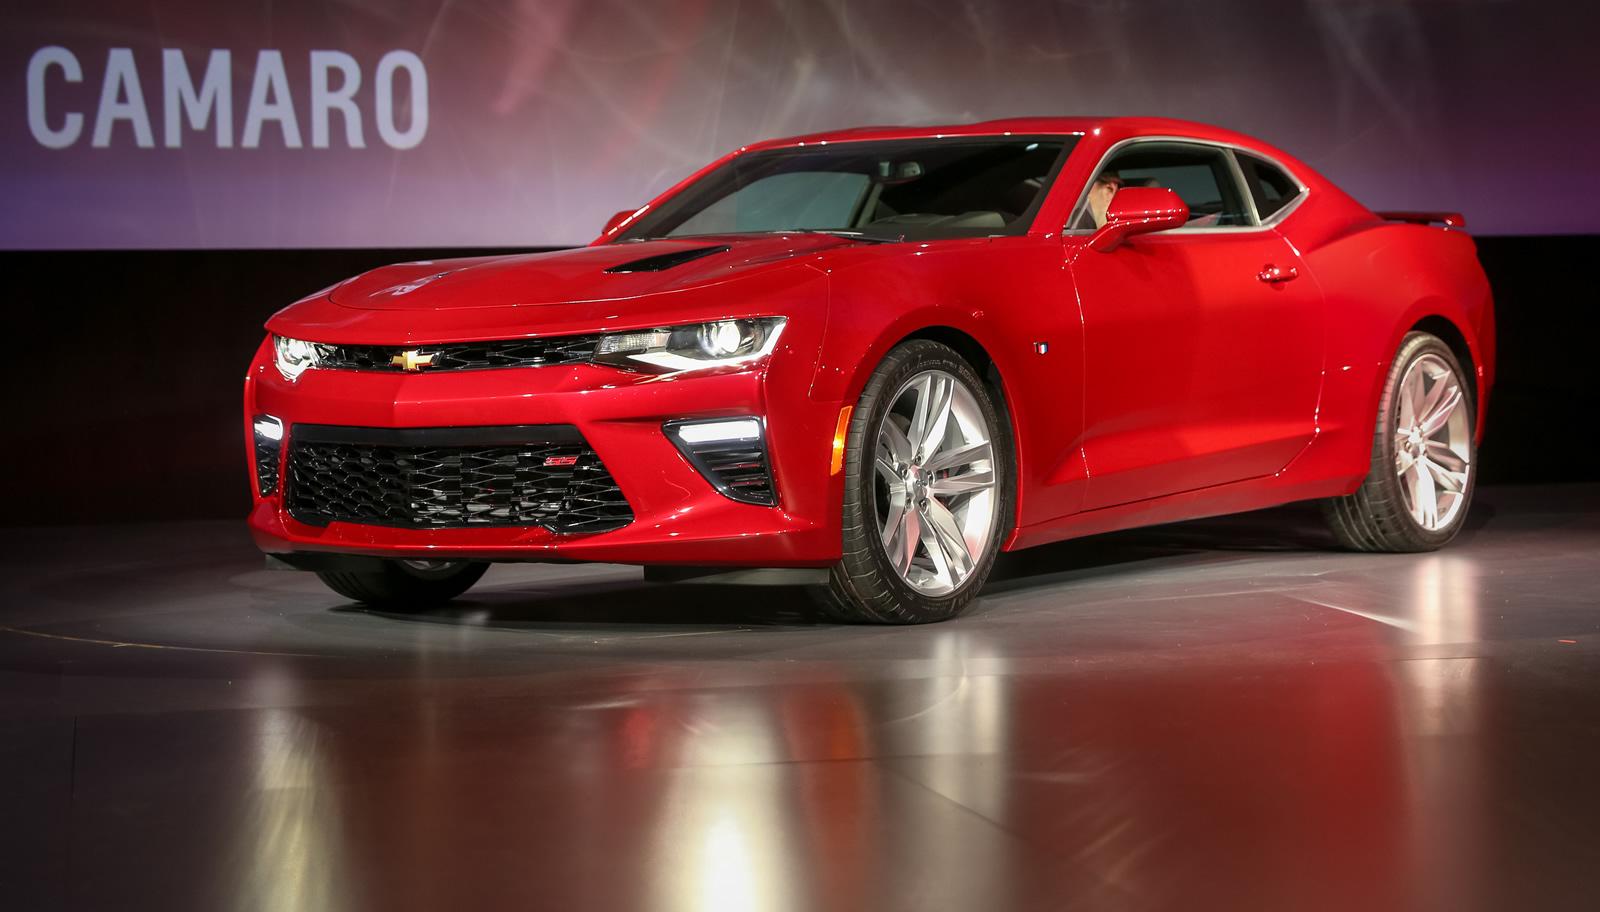 Chevrolet Reveals 2016 Camaro; Now More Powerful with 455hp V8 engine